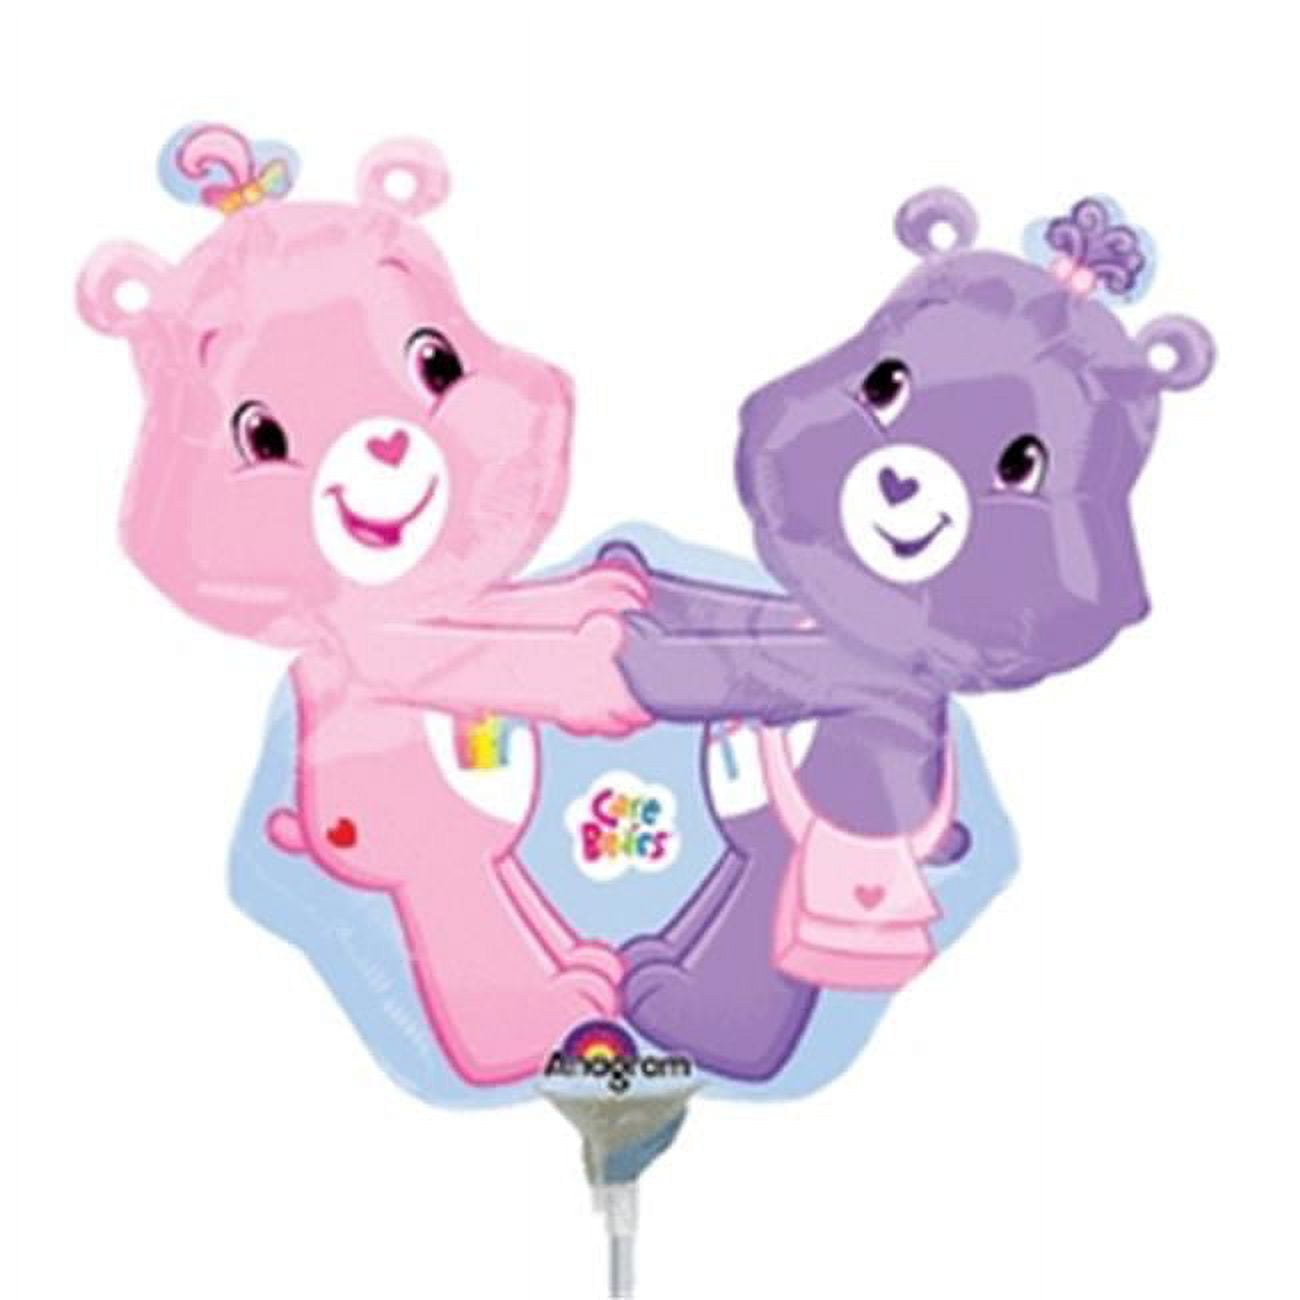 Oh Happy Day - A modern Care Bears party with Care Bears balloon sticks and  free printable custom belly badge confetti! These warm and fuzzy '80s icons  are back, reimagined for a